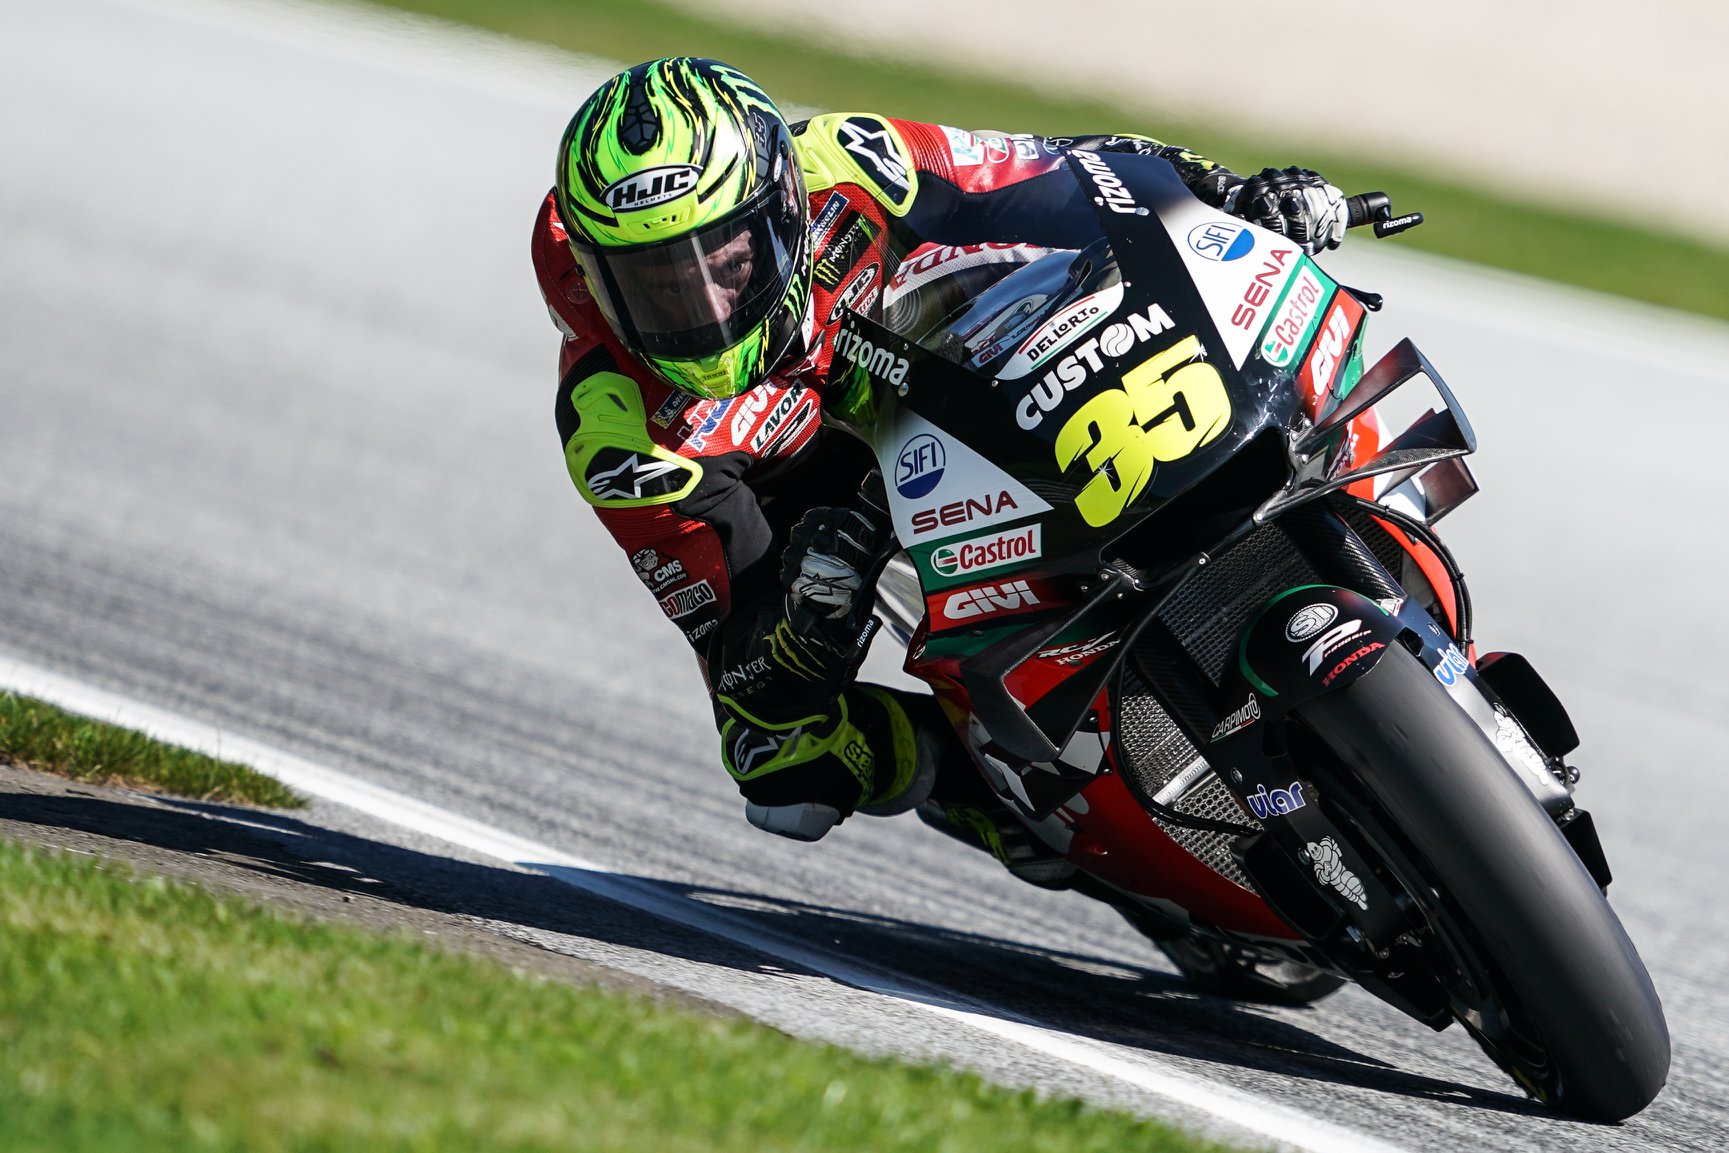 Crutchlow working hard to find answers in Austria